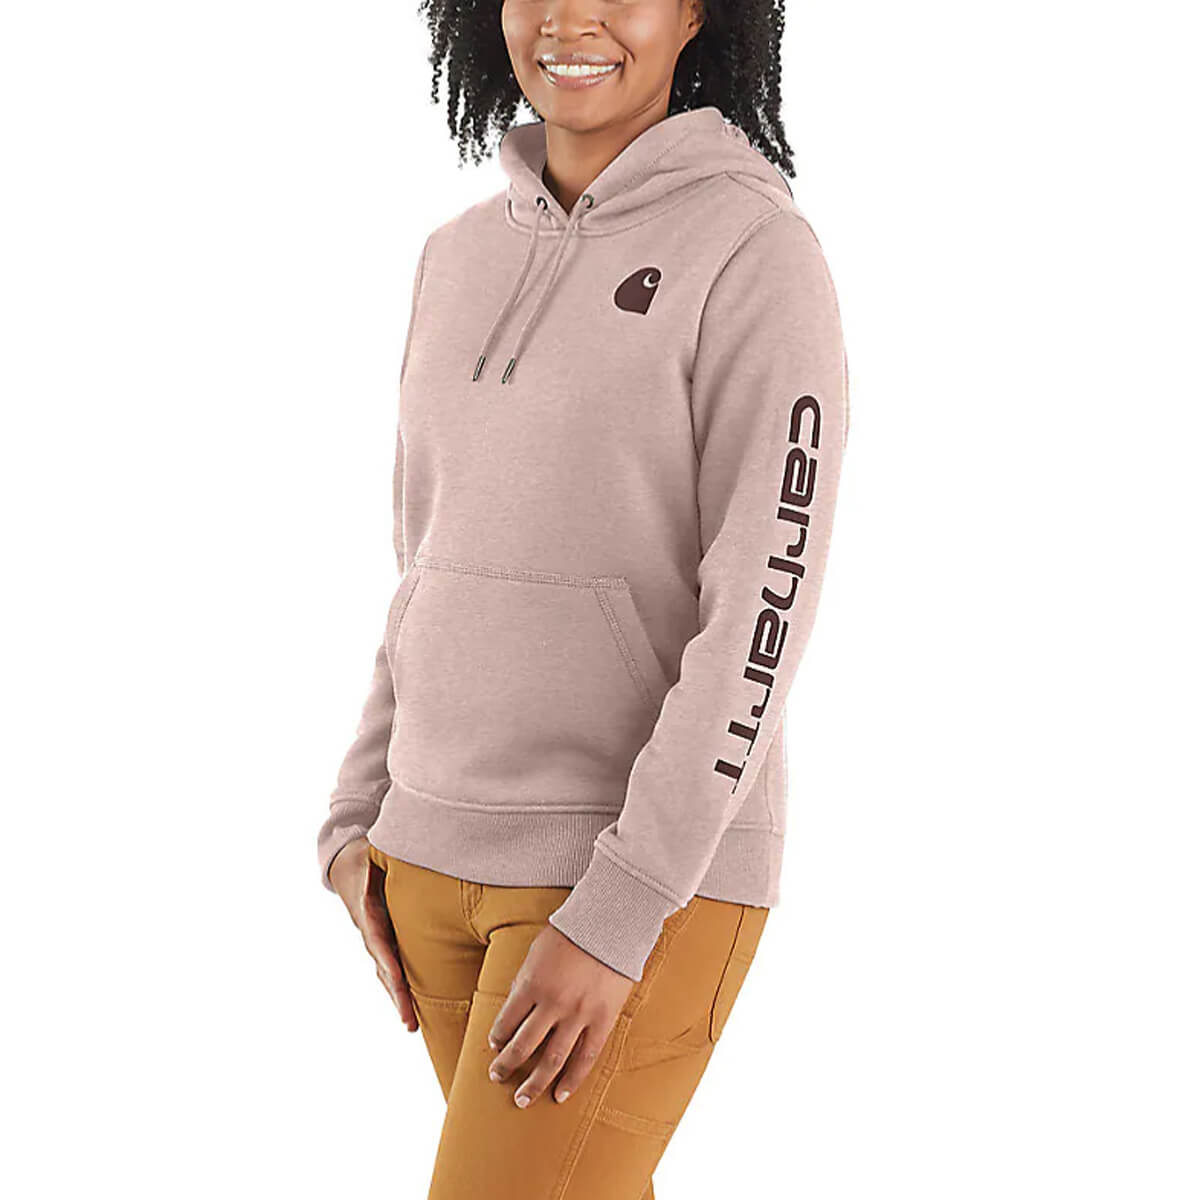 Women's Relaxed Fit Midweight Graphic Sweatshirt - Rose Smoke